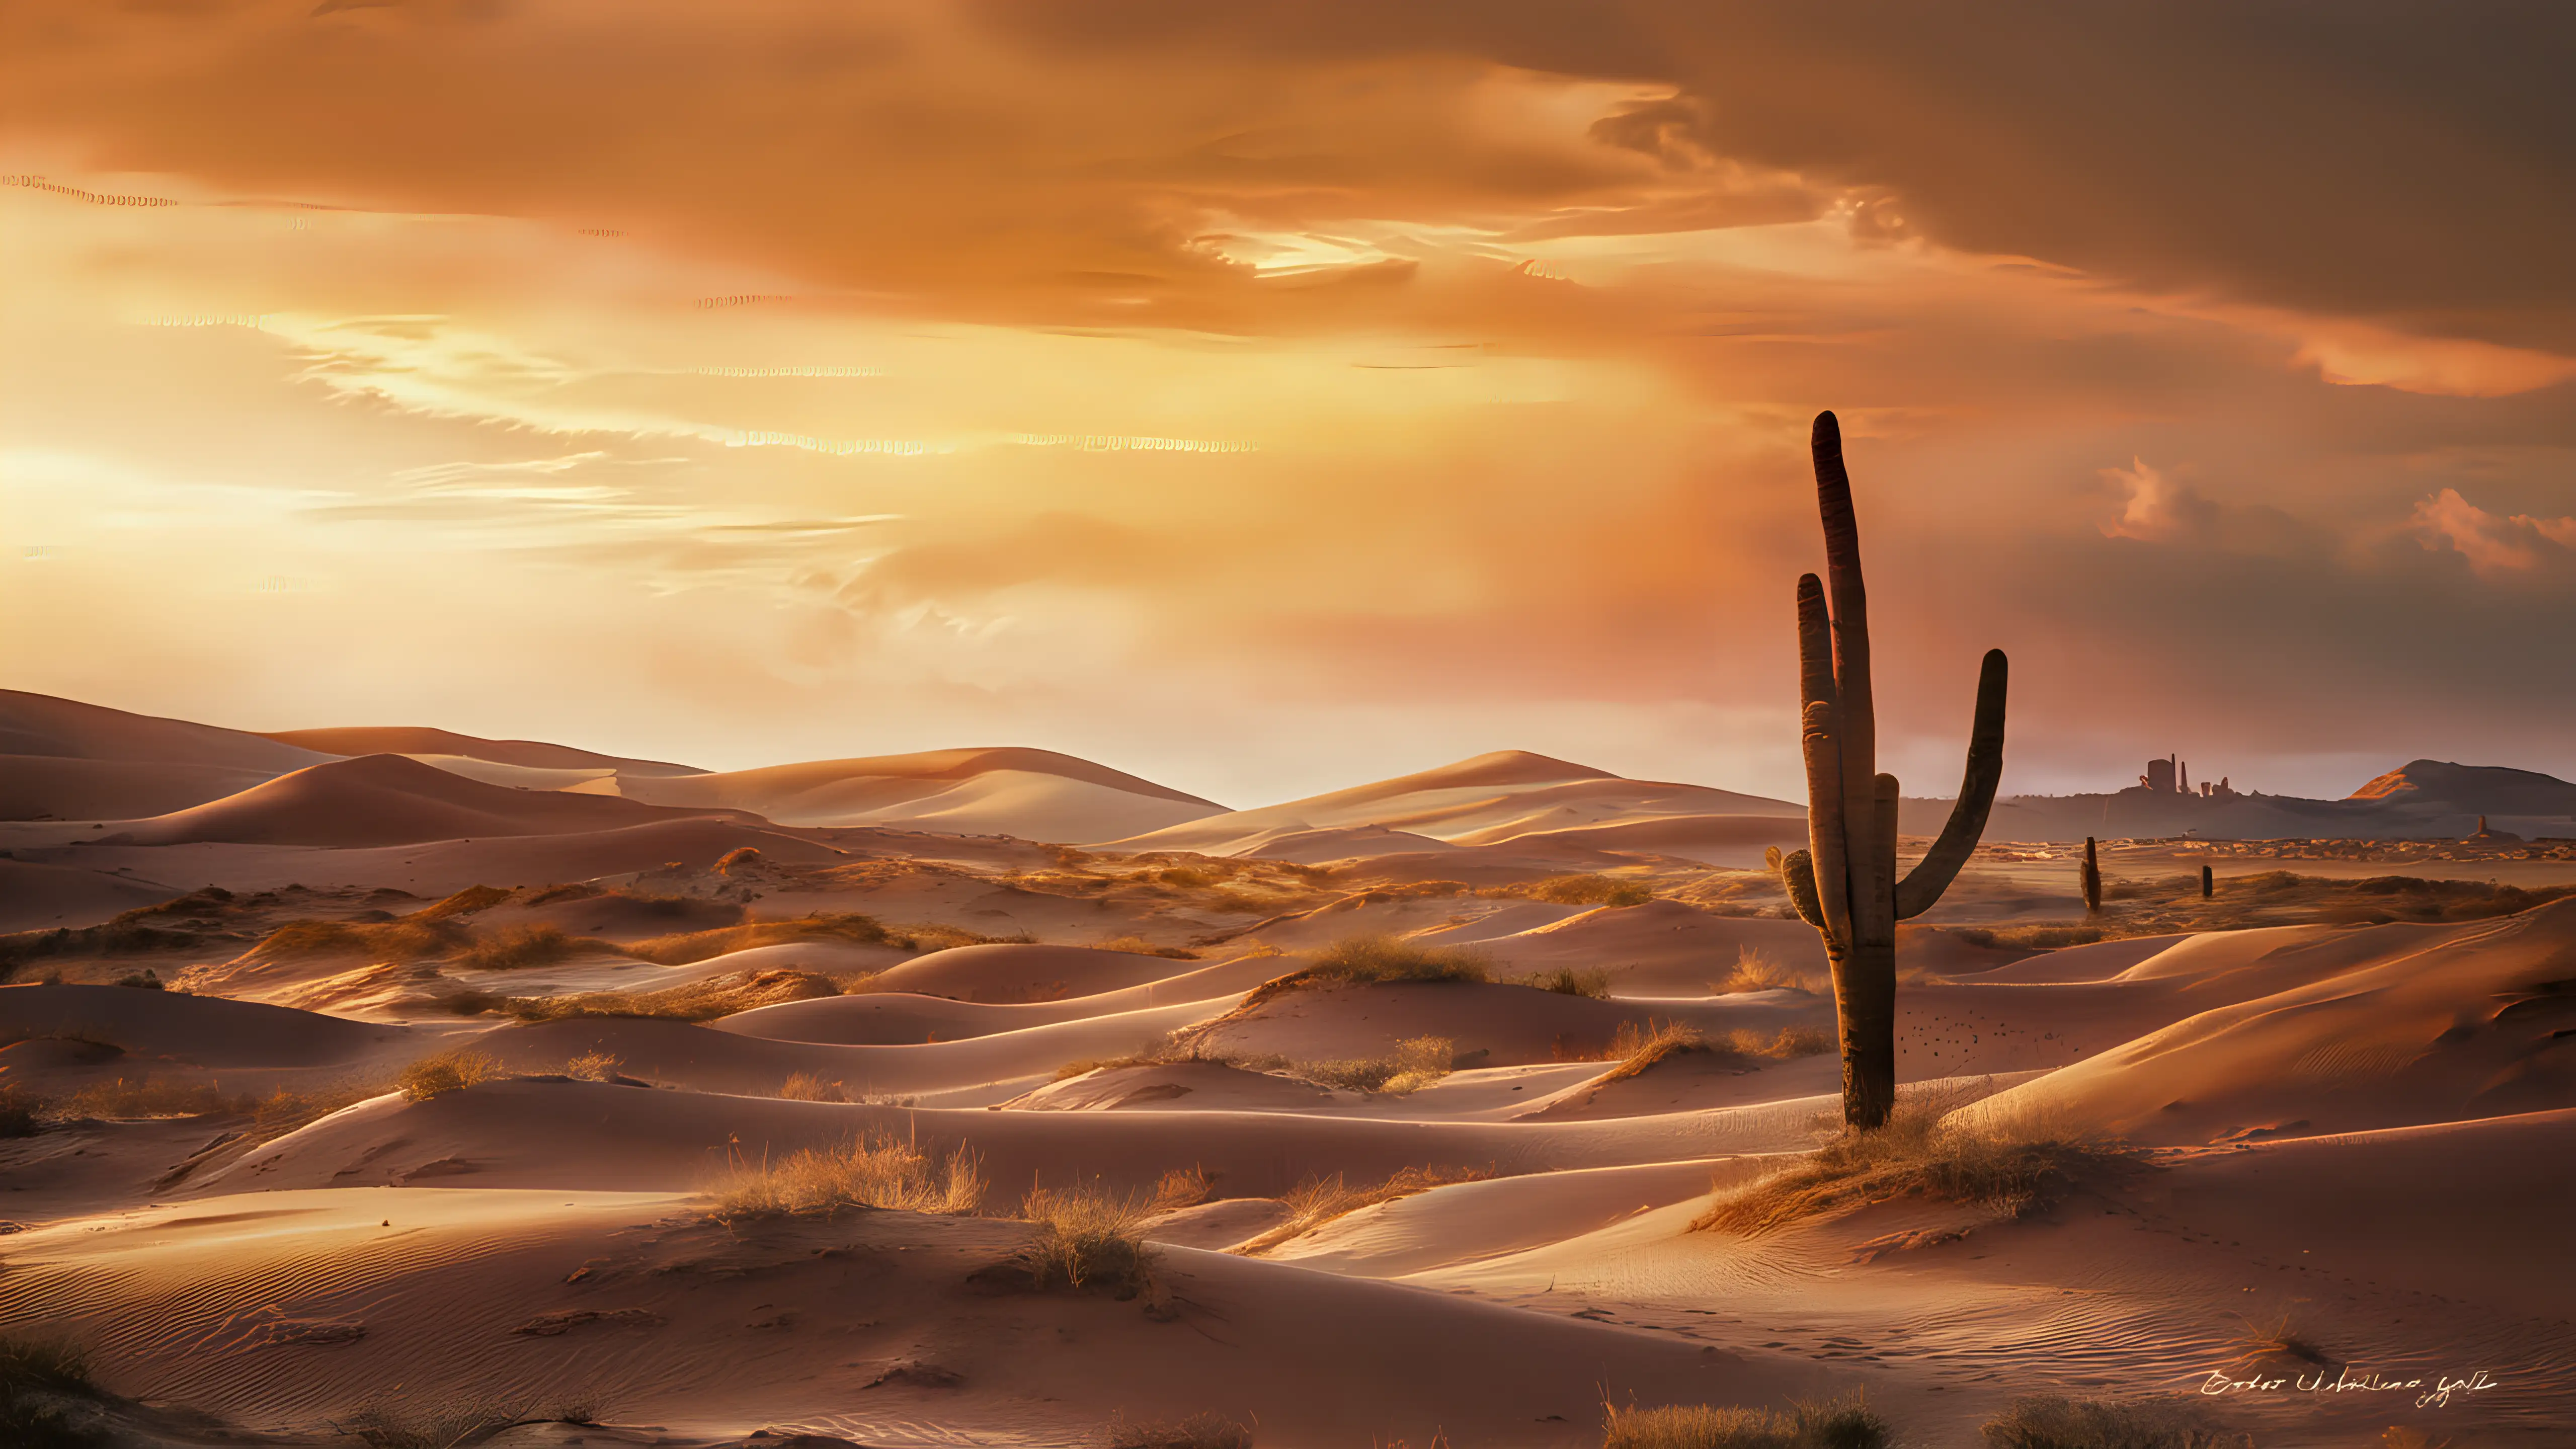 Golden Hour Desert Landscape with Dunes and Mesas